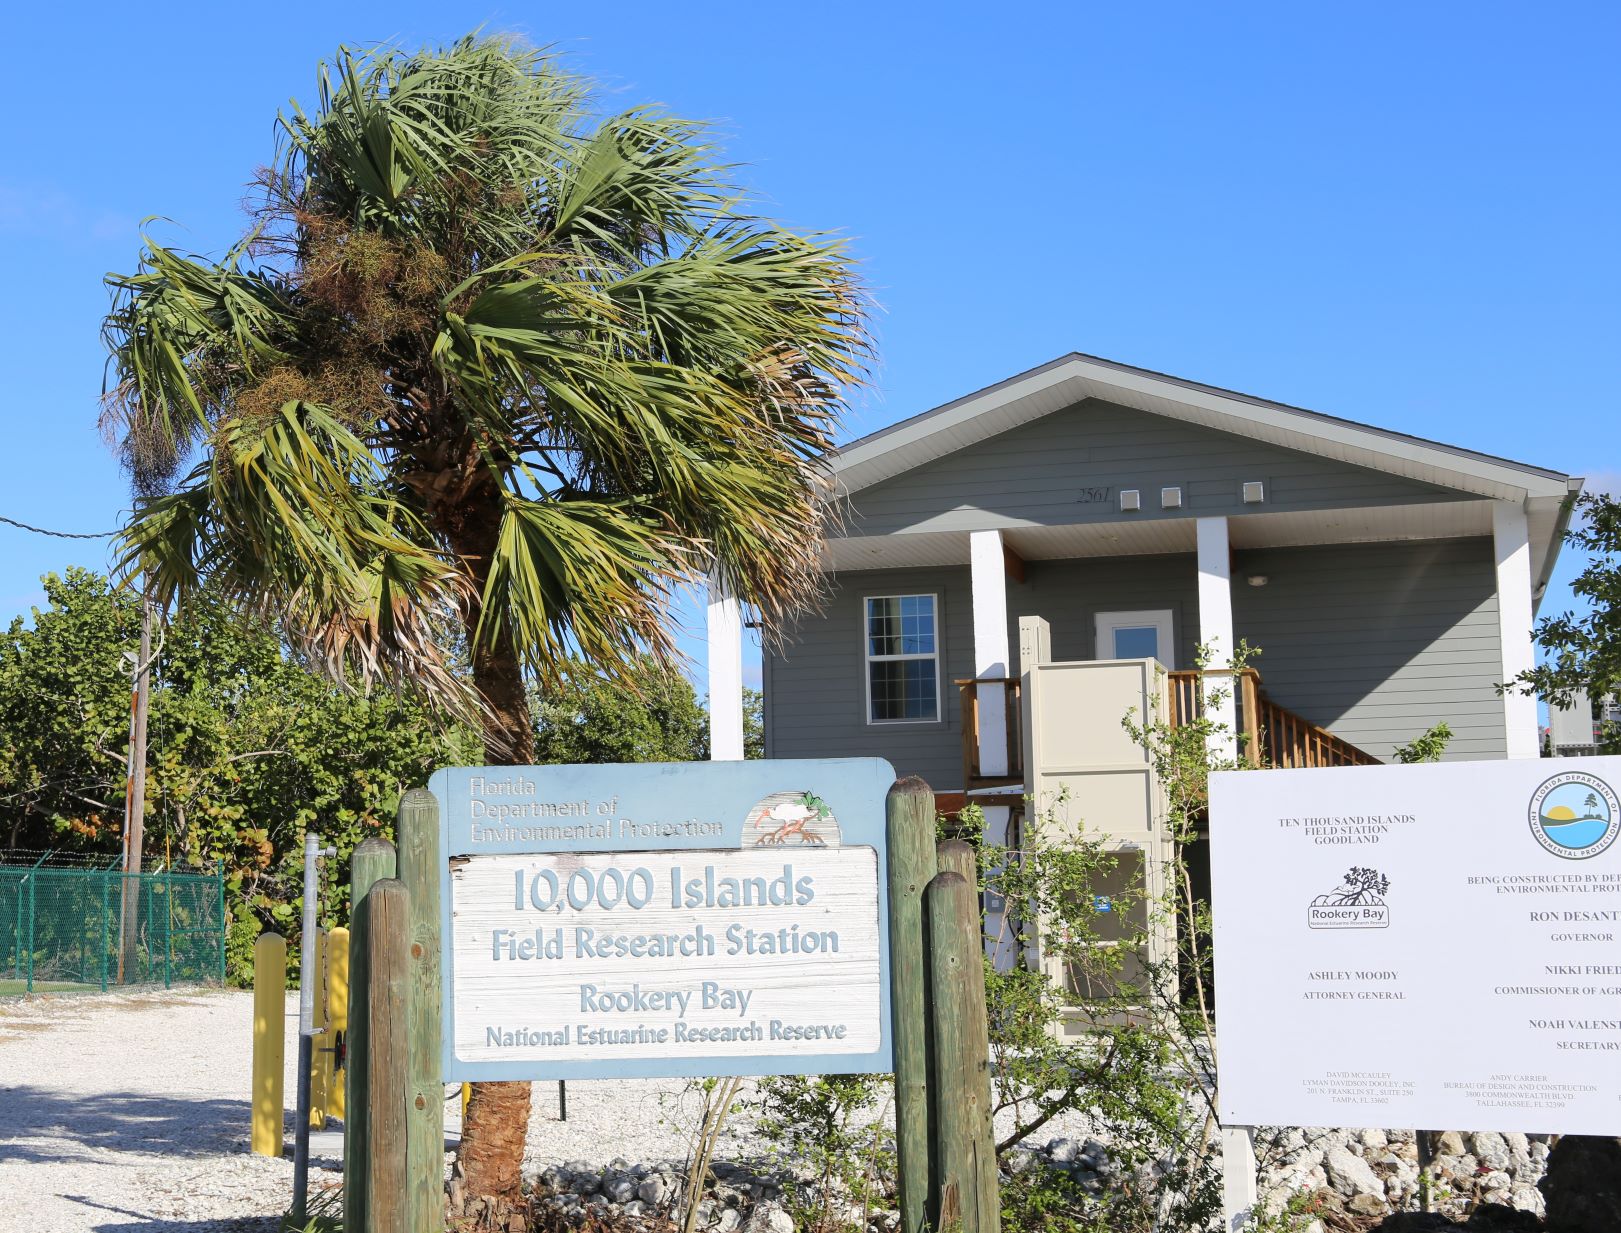 Building has a sign in front that reads, “10,000 Islands Field Research Station, Rookery Bay National Estuarine Research Reserve.”